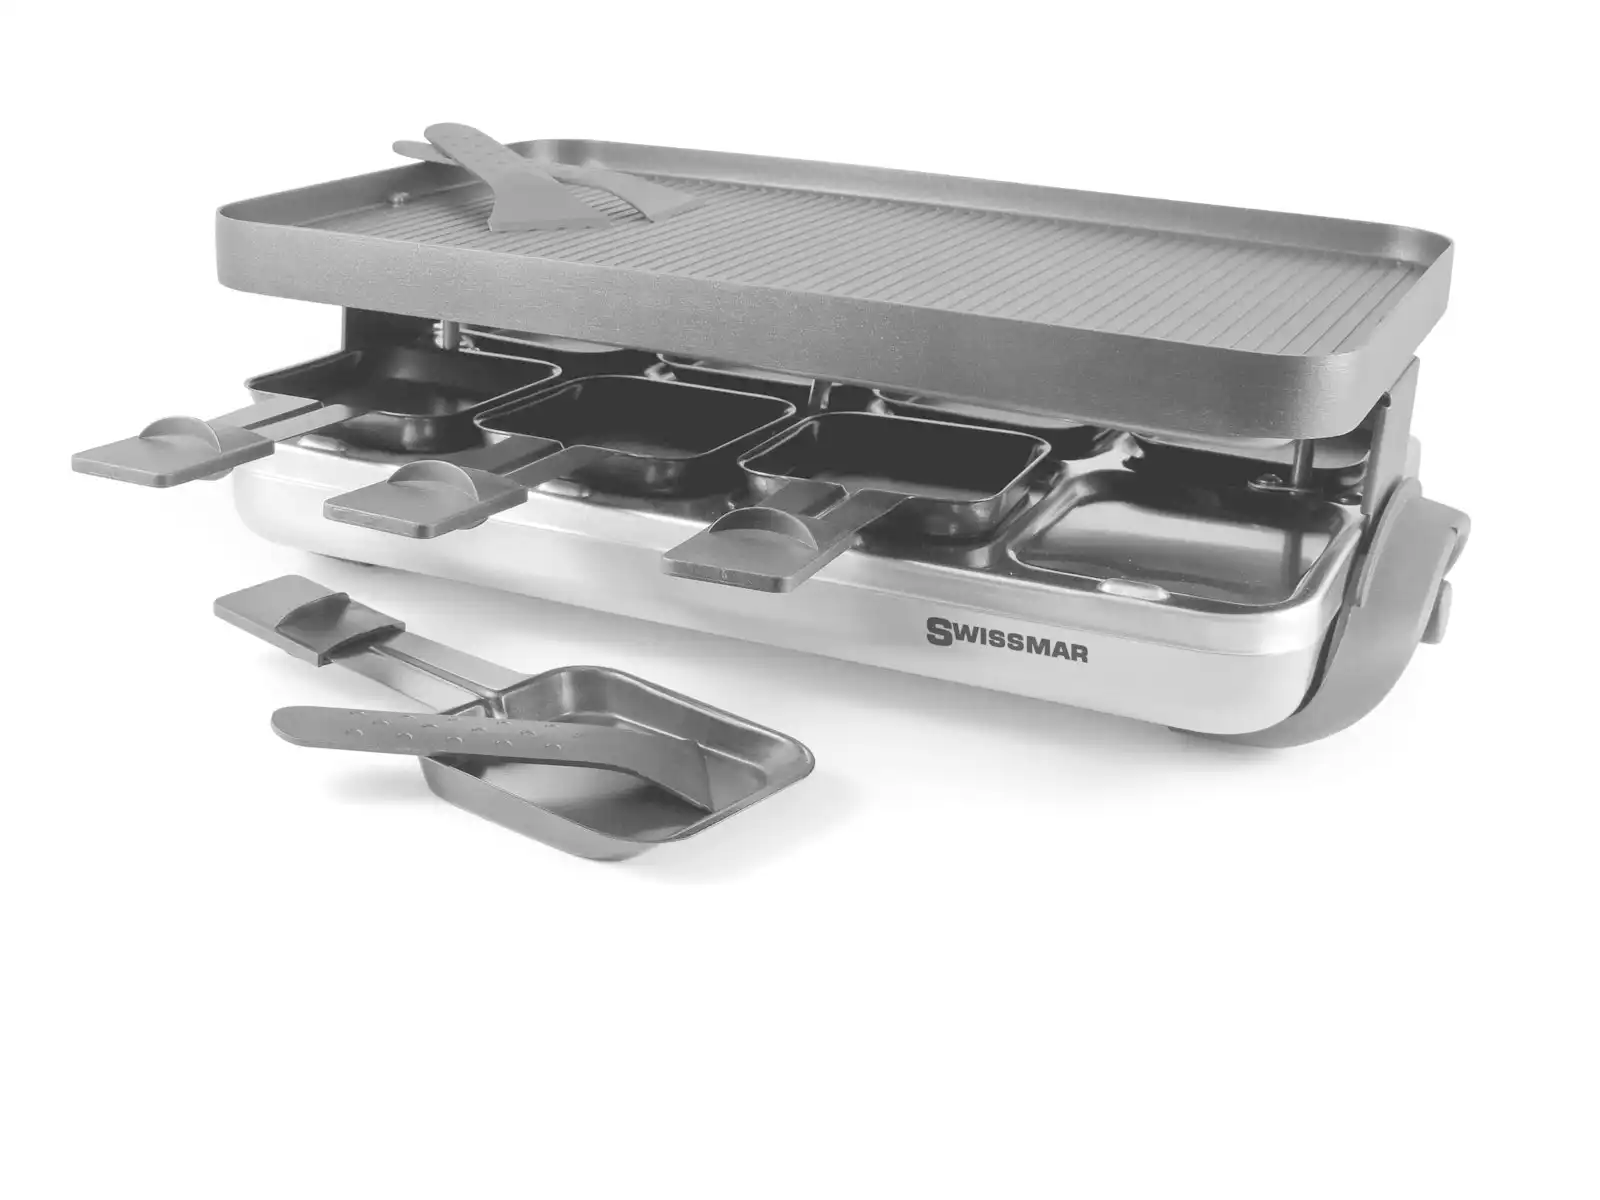 Swissmar 75901 8 Person Raclette Party Grill Stainless Steel